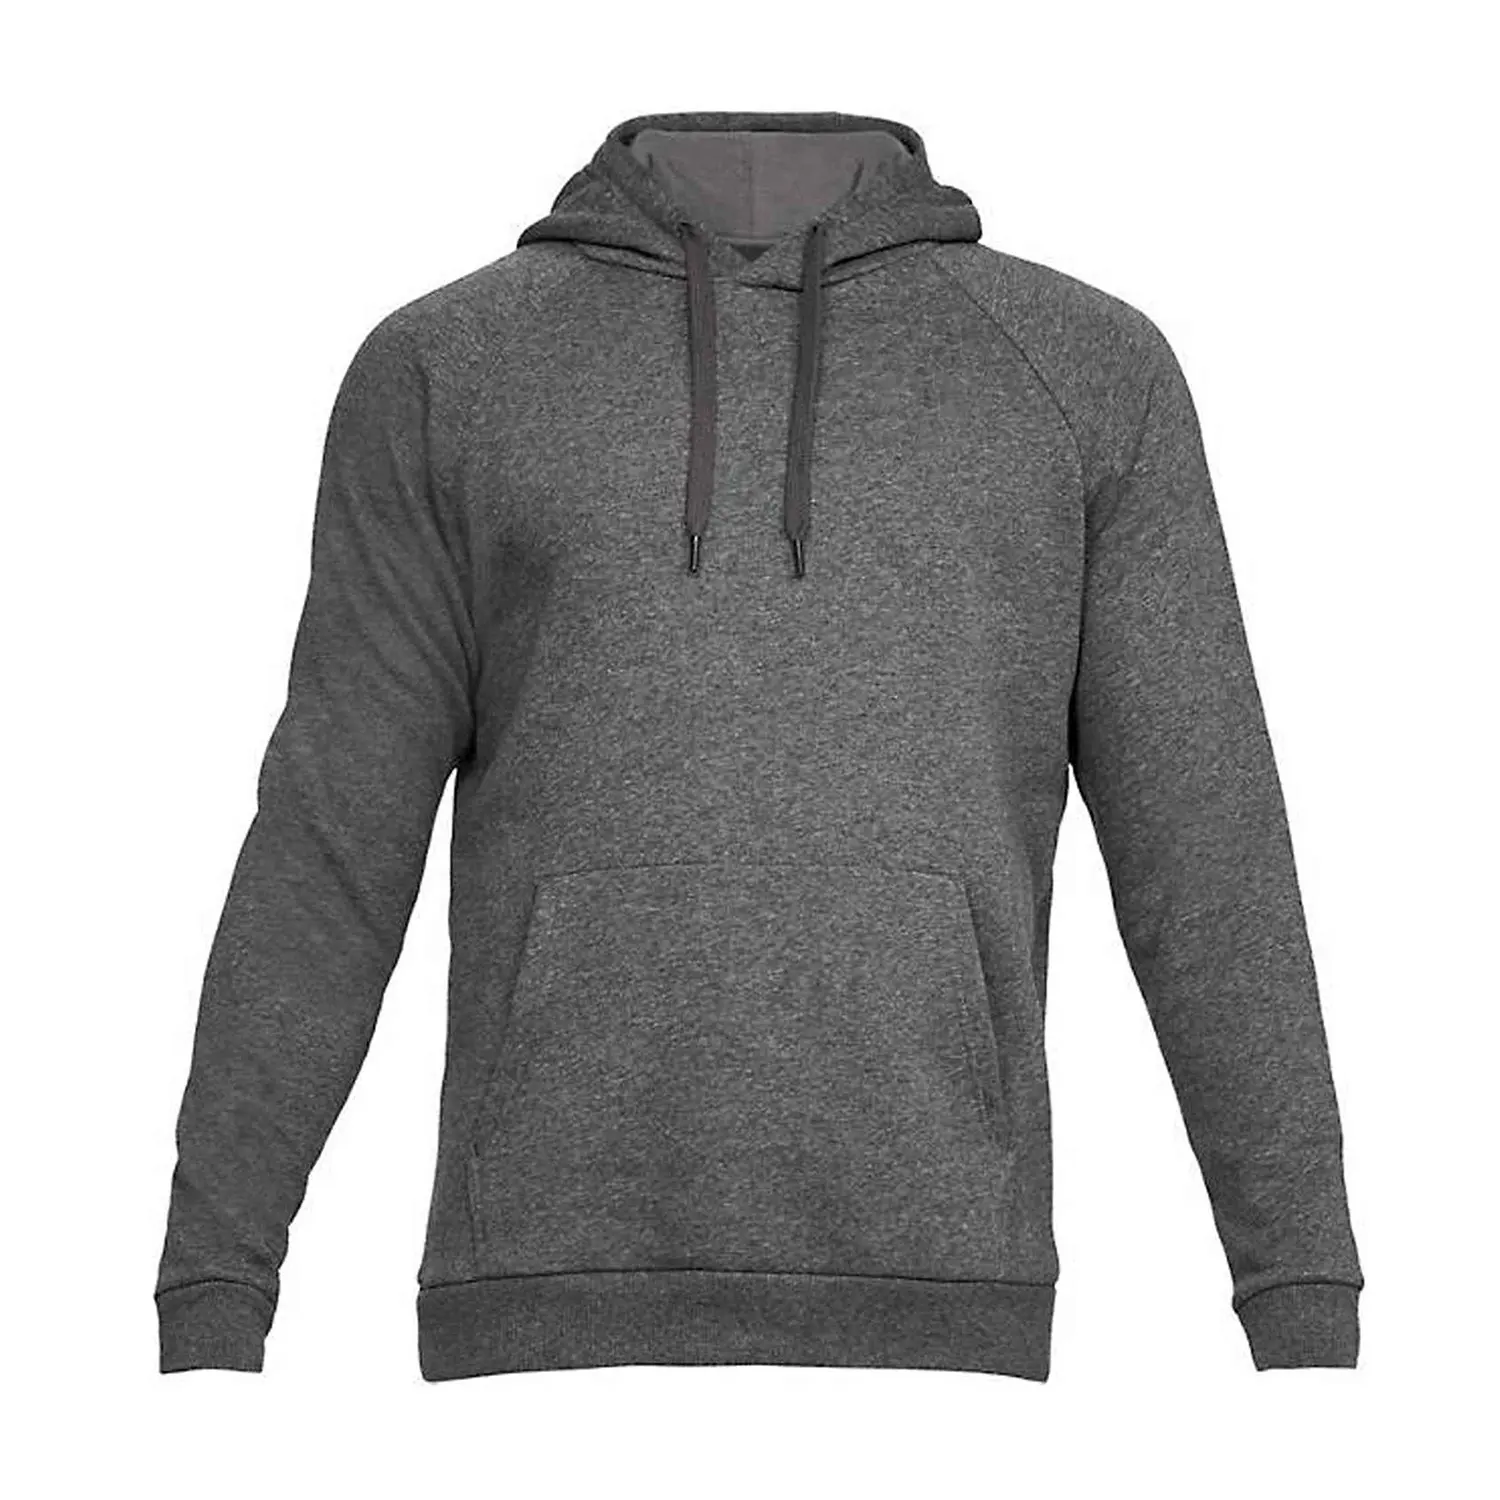 Polyester Polaire Pull Long Raglan Manches Avec Poignets Et Ourlet Crossover Hoodies